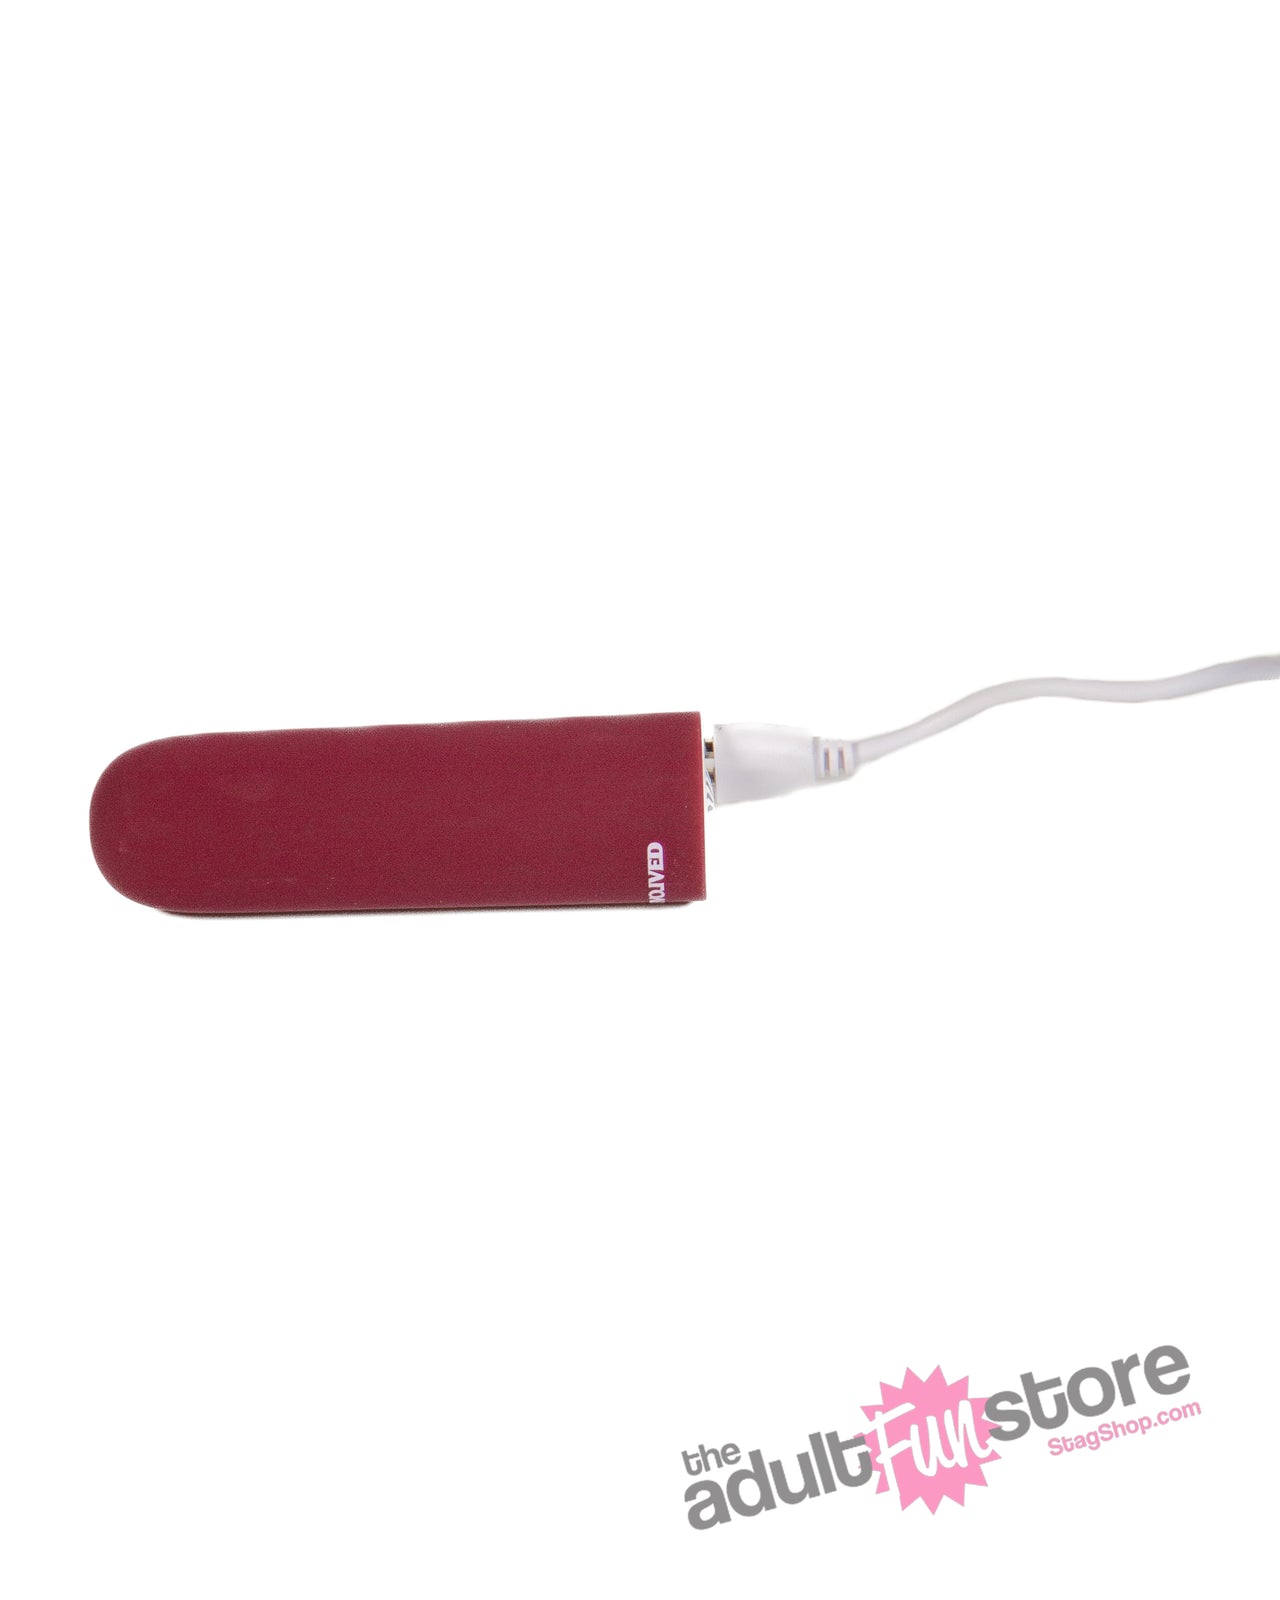 Evolved - Mighty Thick Bullet Vibrator - Burgundy - Stag Shop